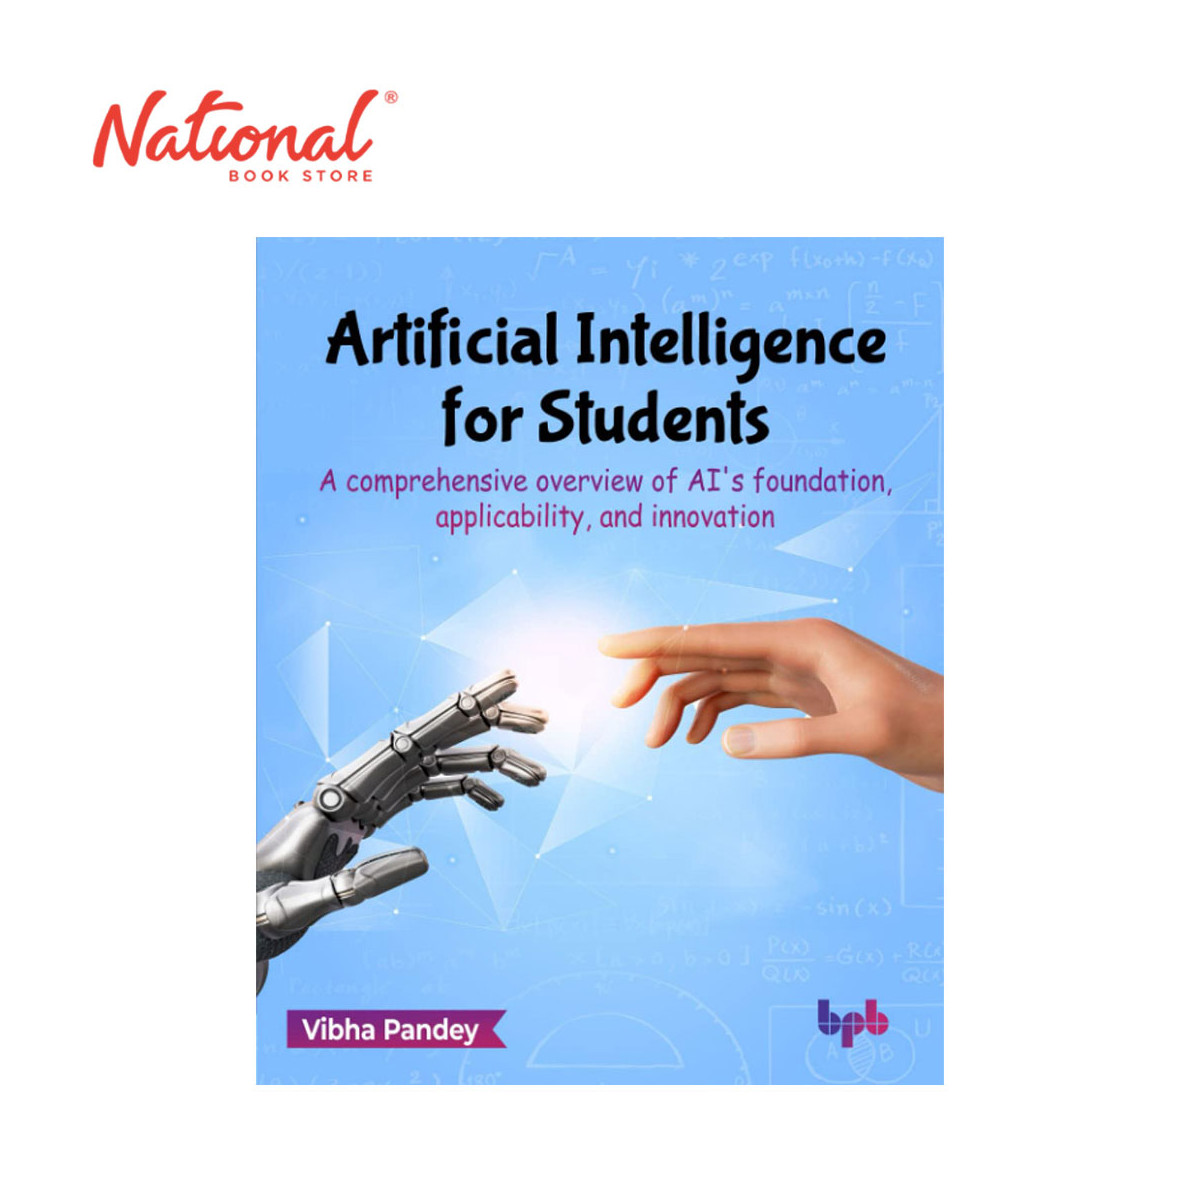 Artificial Intelligence for Students by Vibha Pandey - Trade Paperback - Computer Books